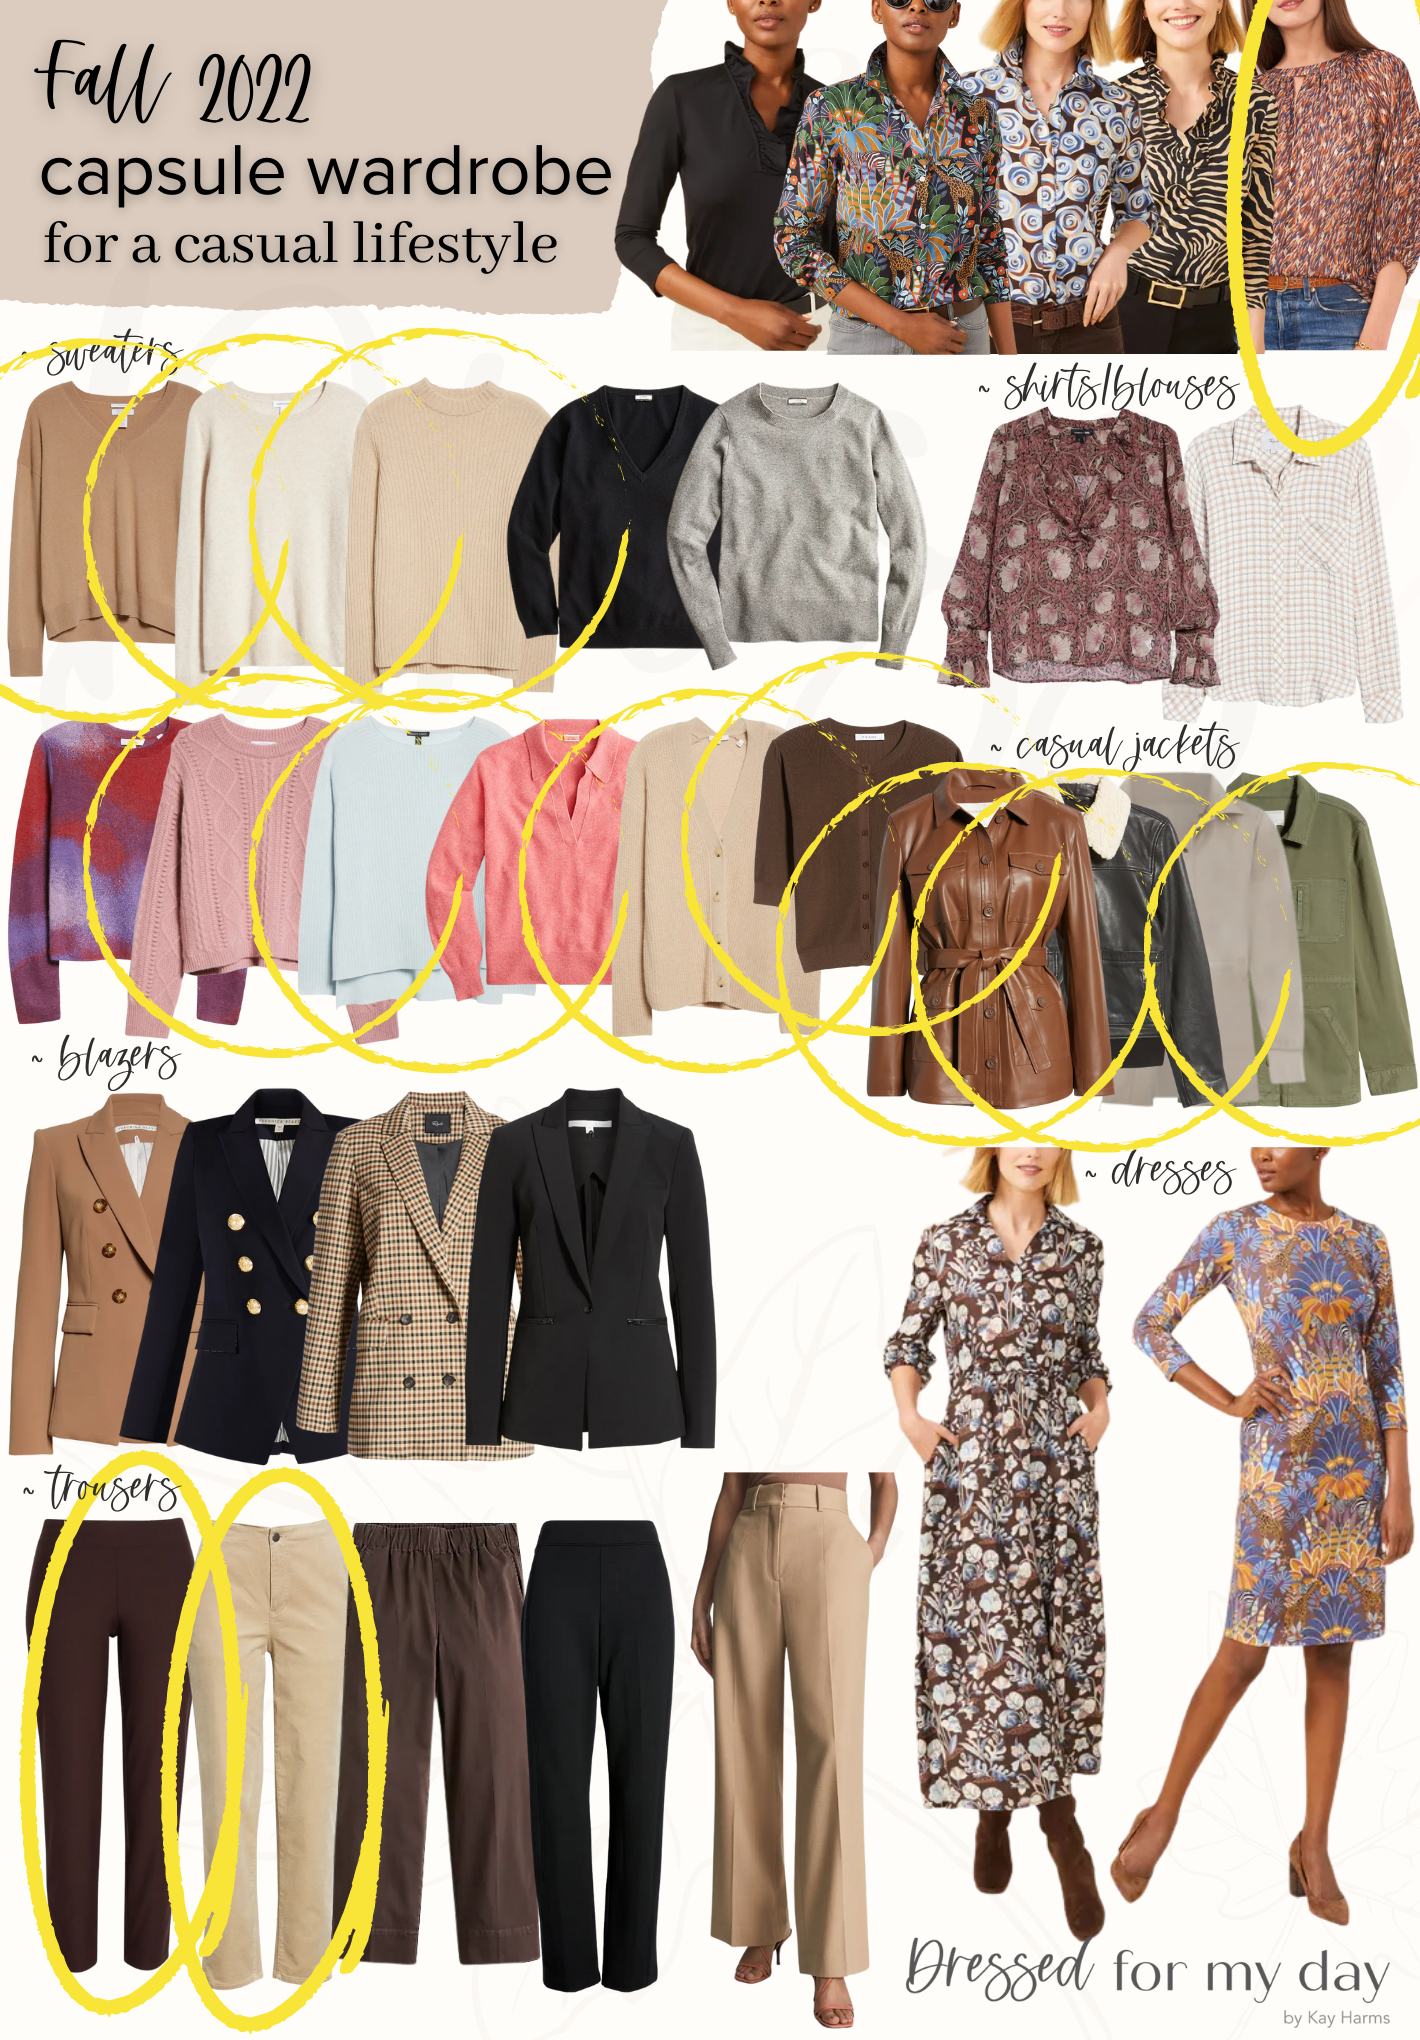 Kay's Fall 2022 Capsule Wardrobe and Outfits (2)